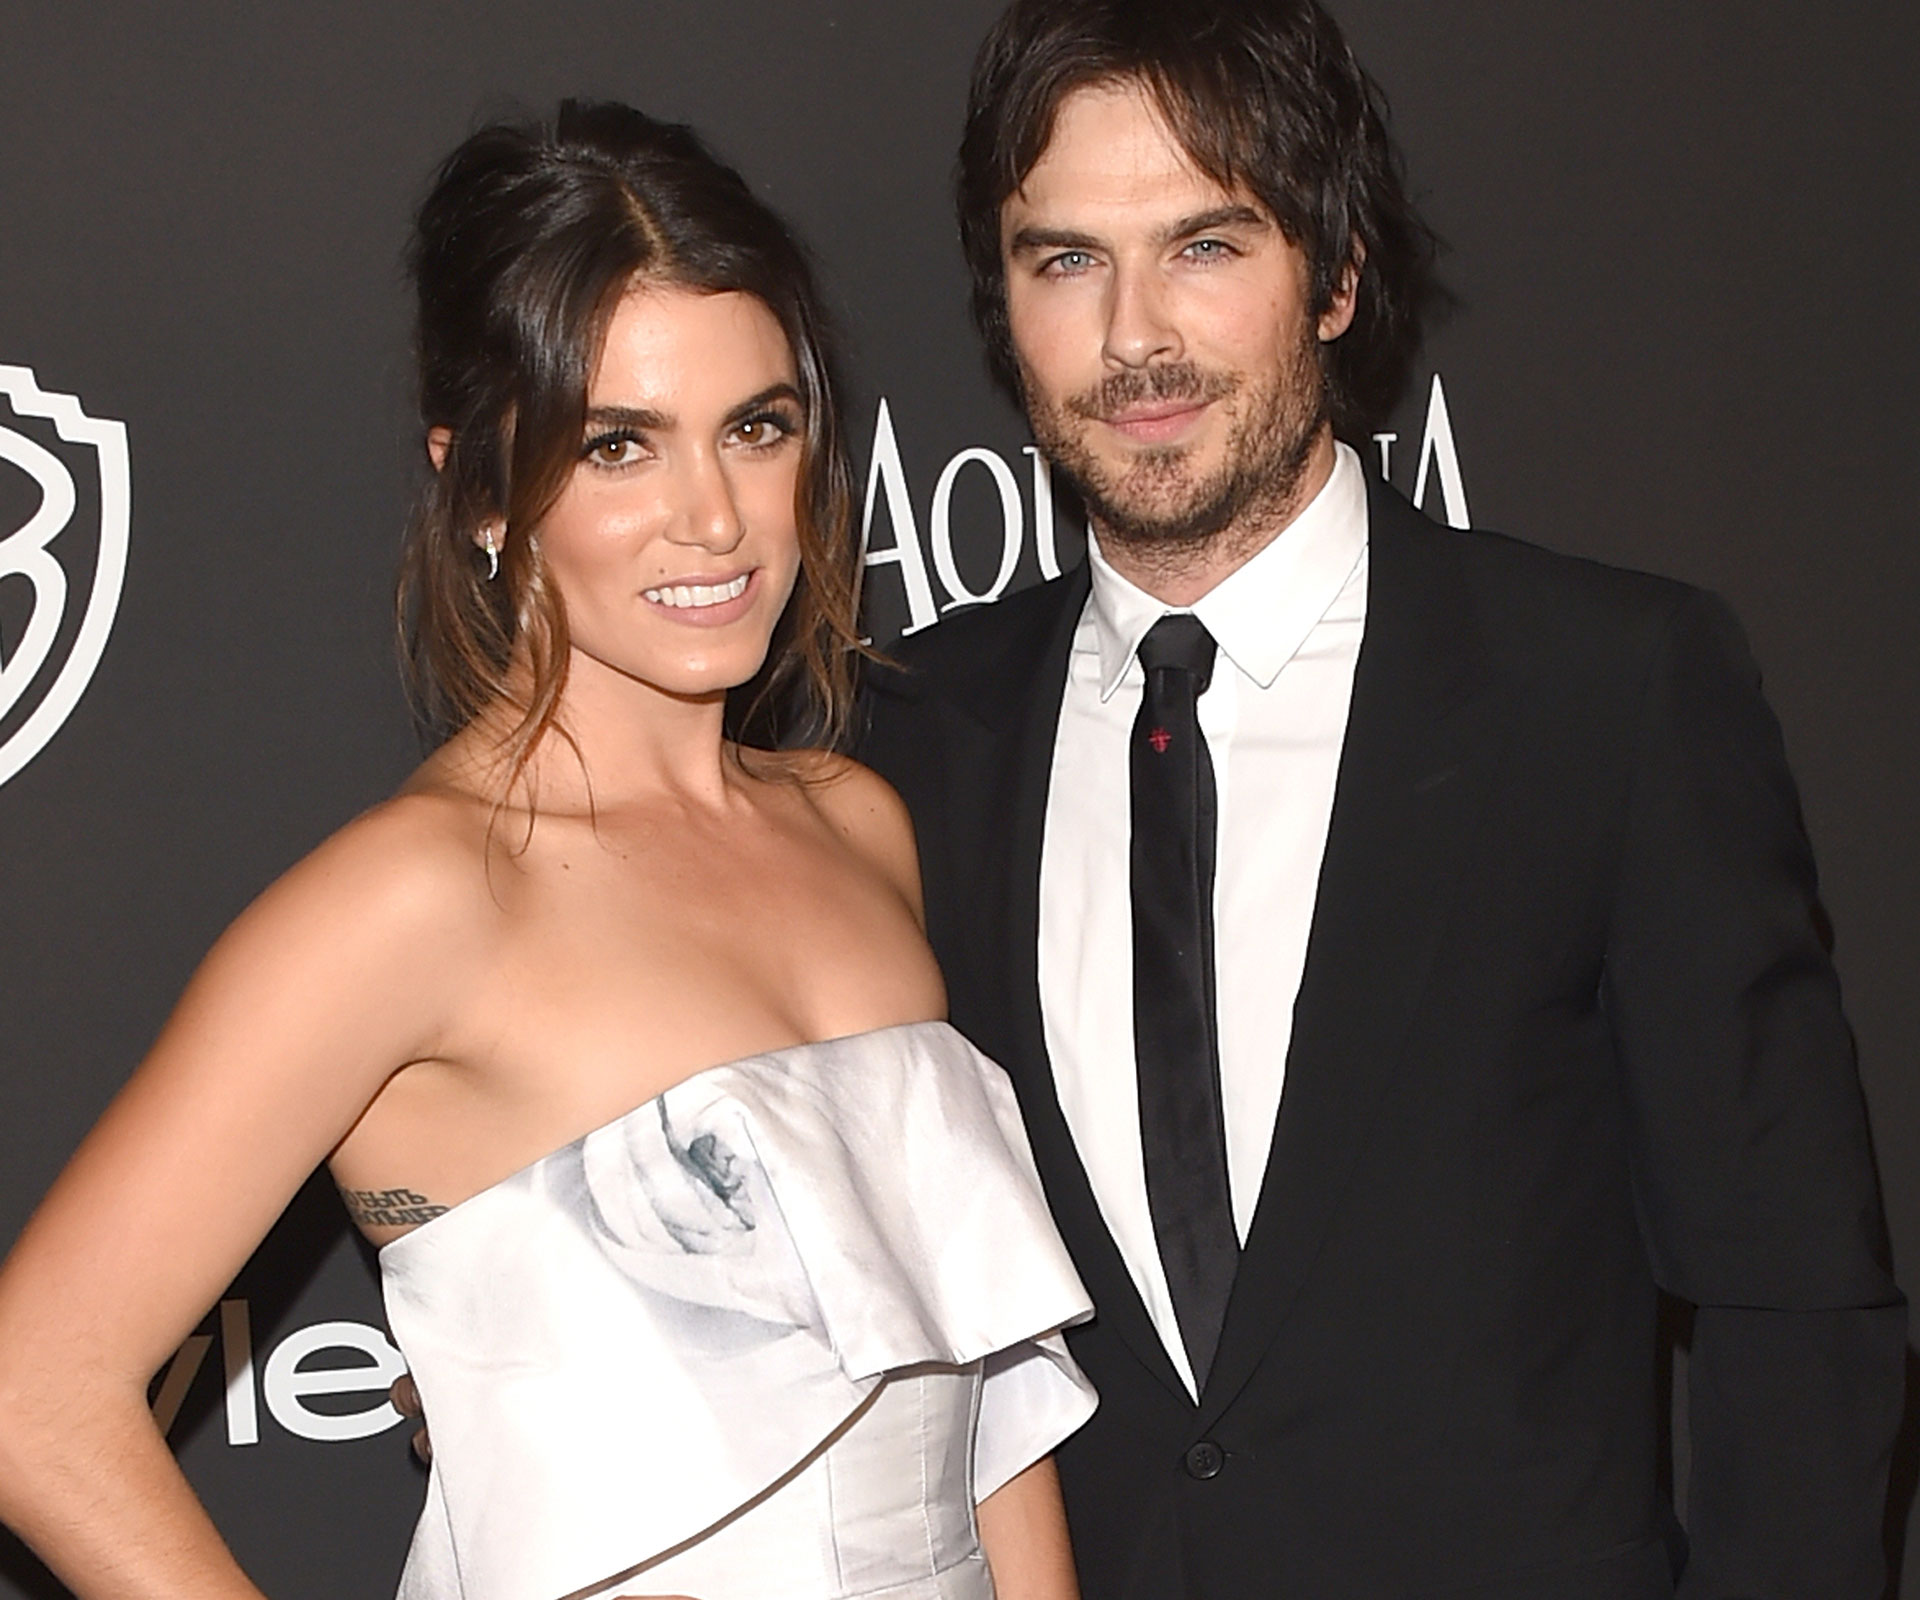 Ian Somerhalder ties the knot with Nikki Reed after whirlwind romance